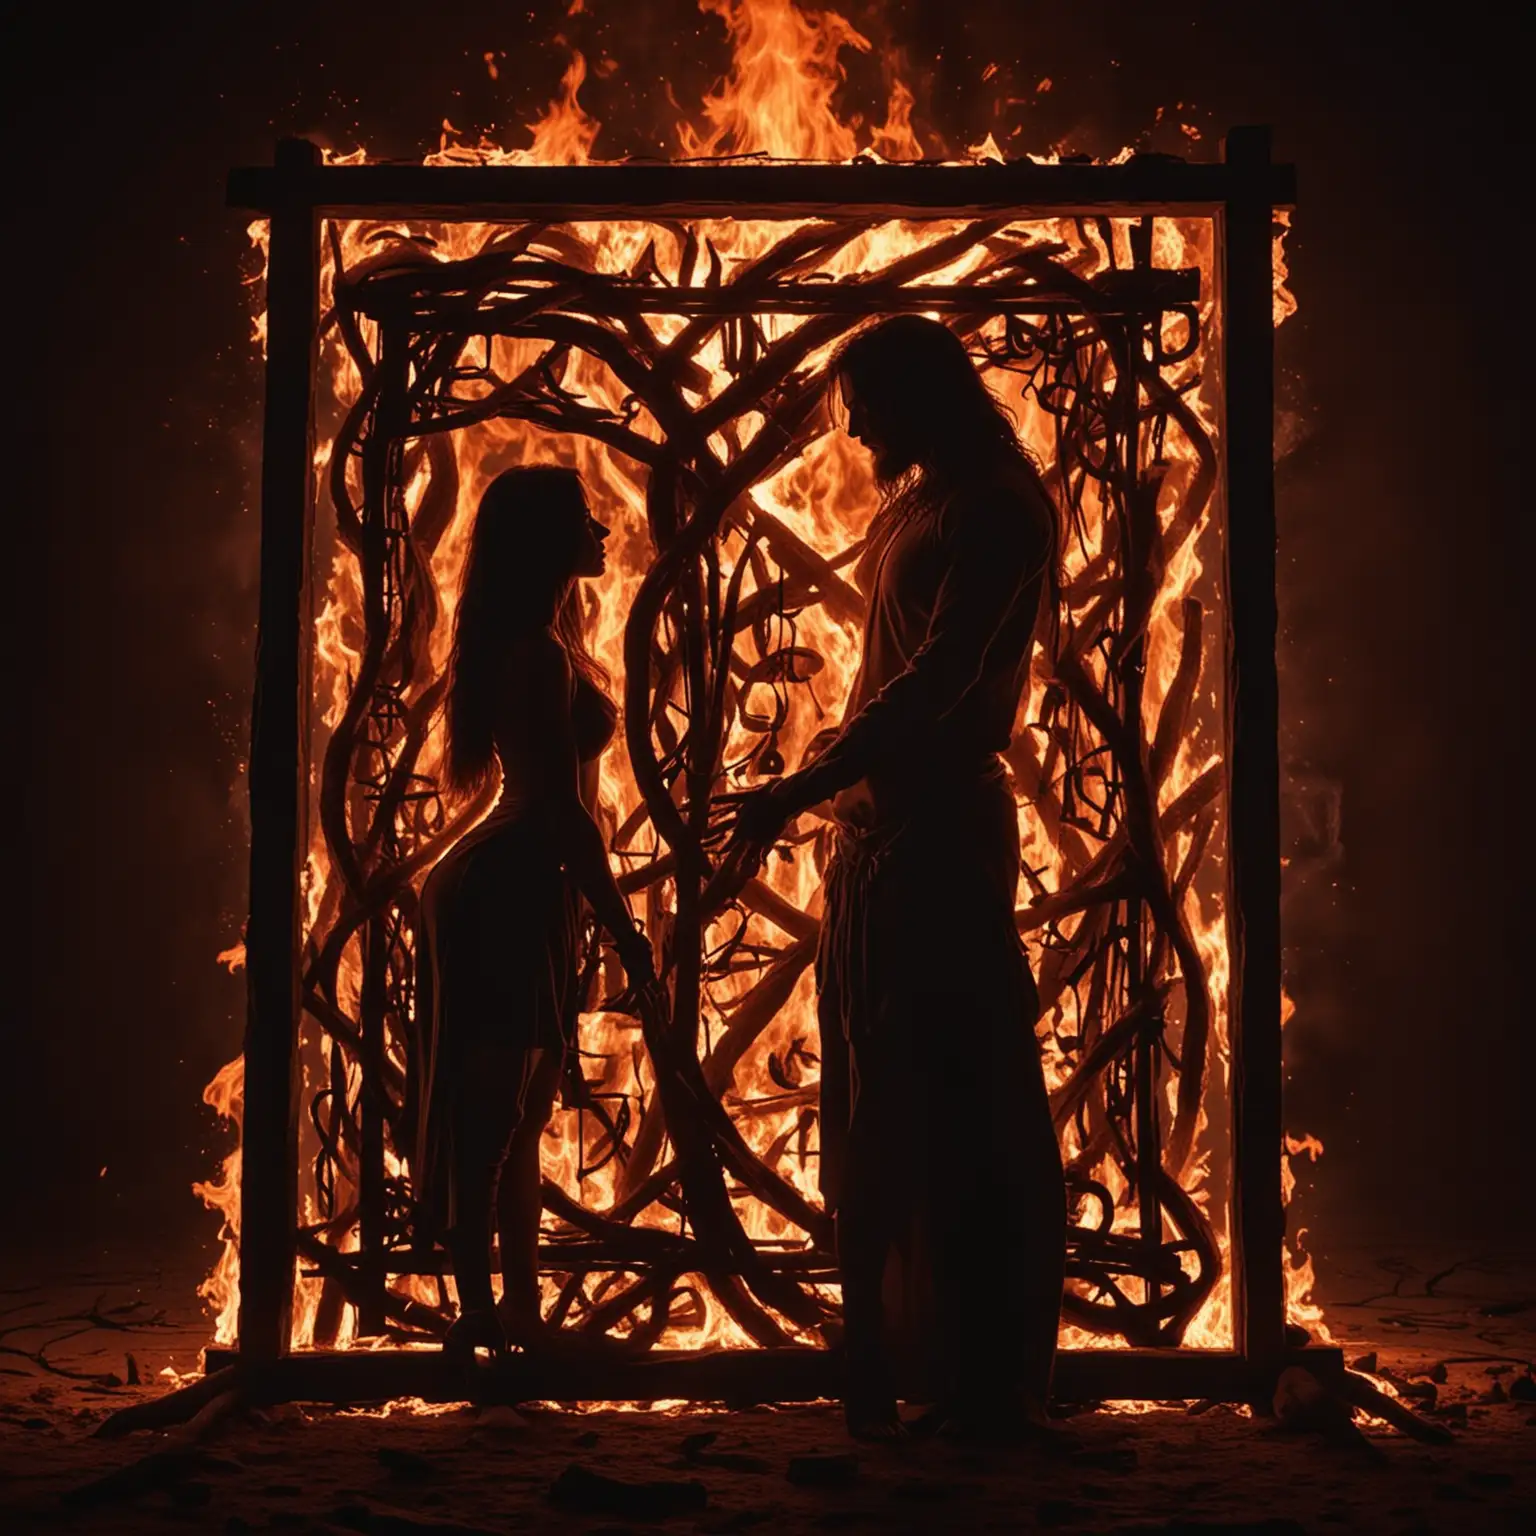 Passionate Love Silhouettes of Man and Woman by a Fiery Frame of Runes